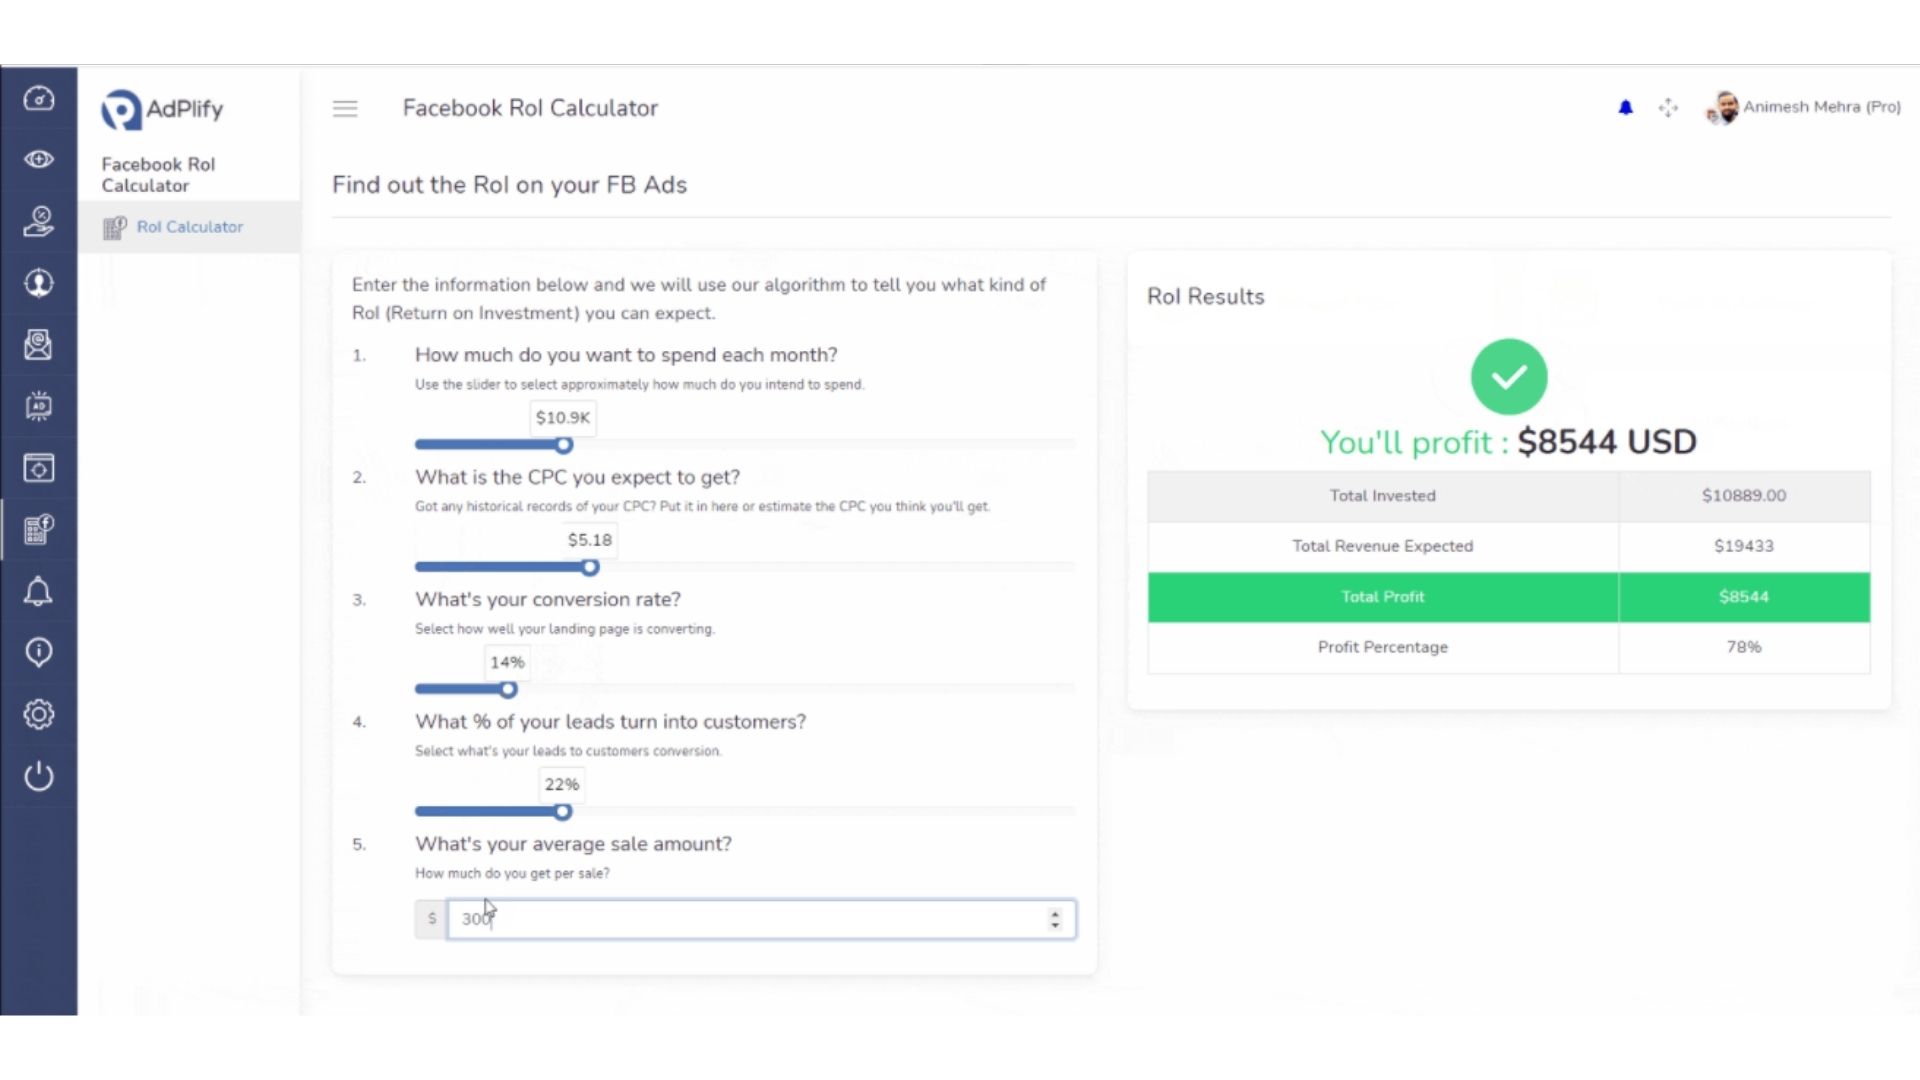 RoI Calculator: Scale your ads intelligently & profitably